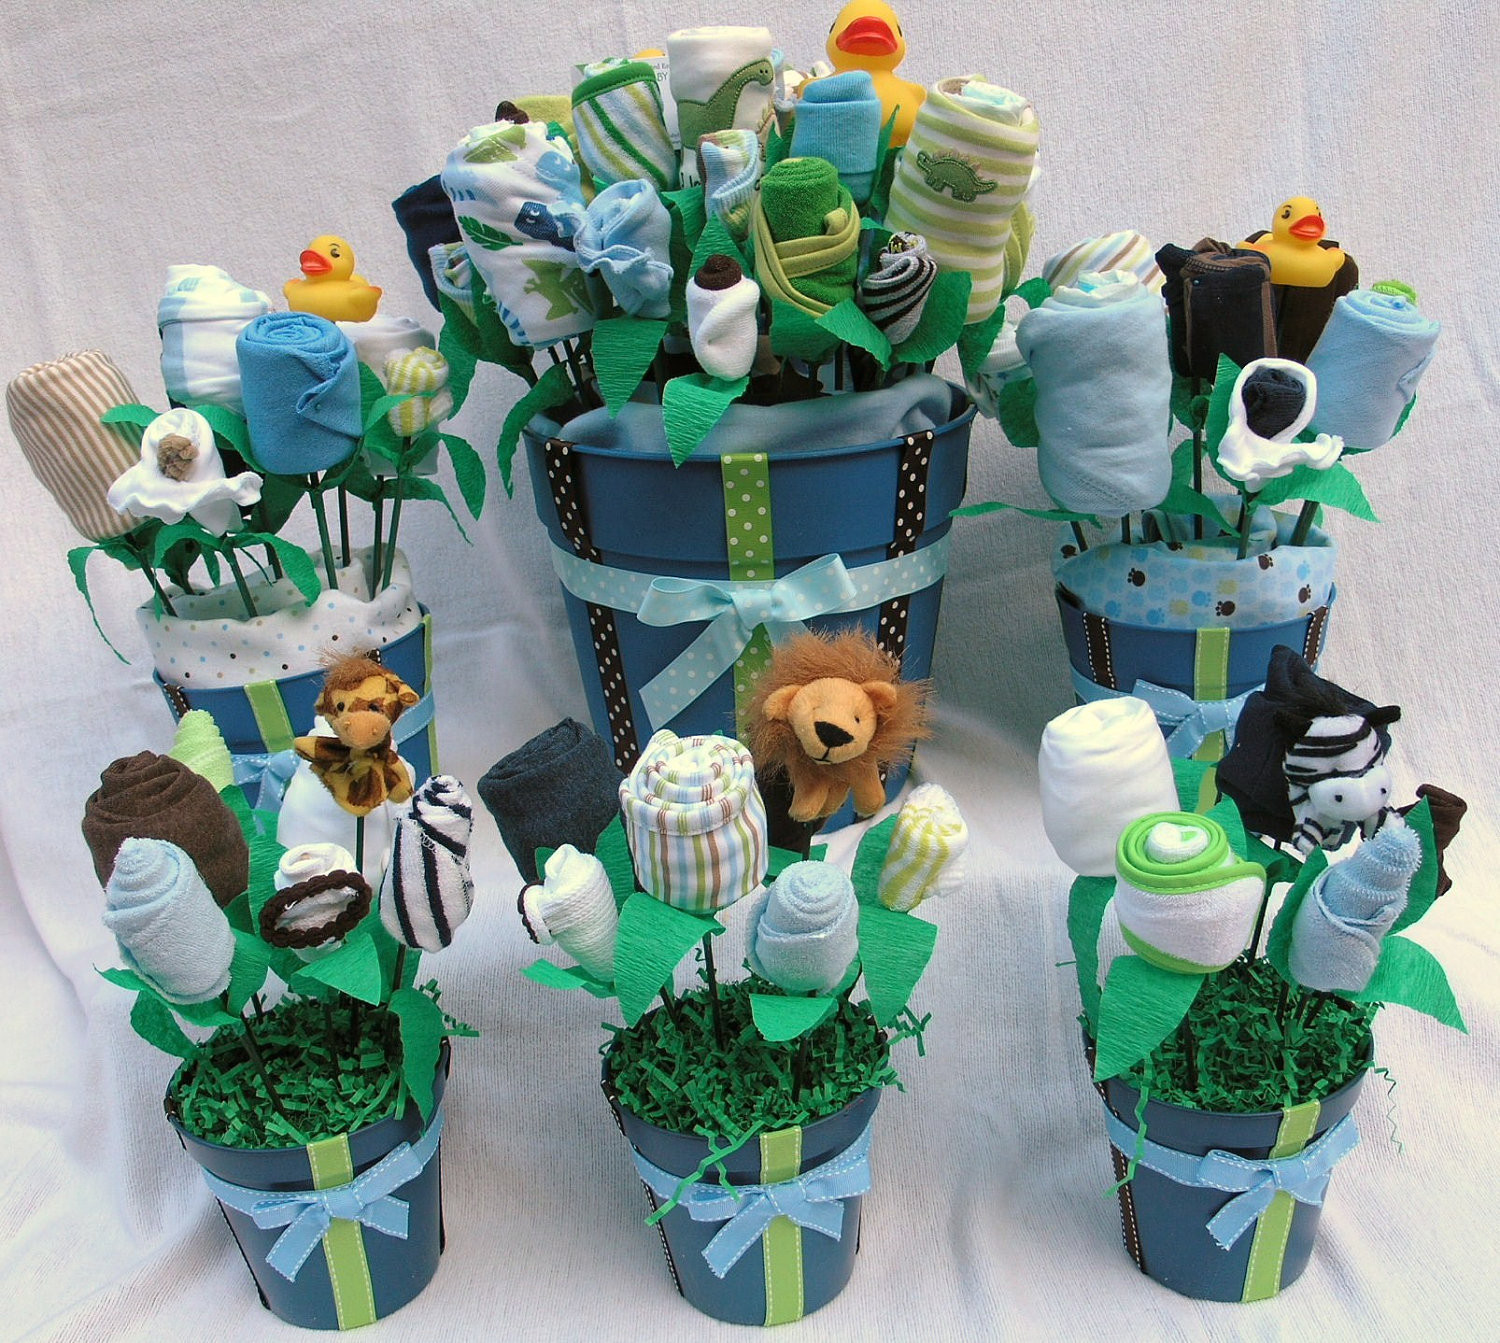 Baby Shower Boy Decoration Ideas
 Baby Boy Shower Centerpieces for Tables that will be the